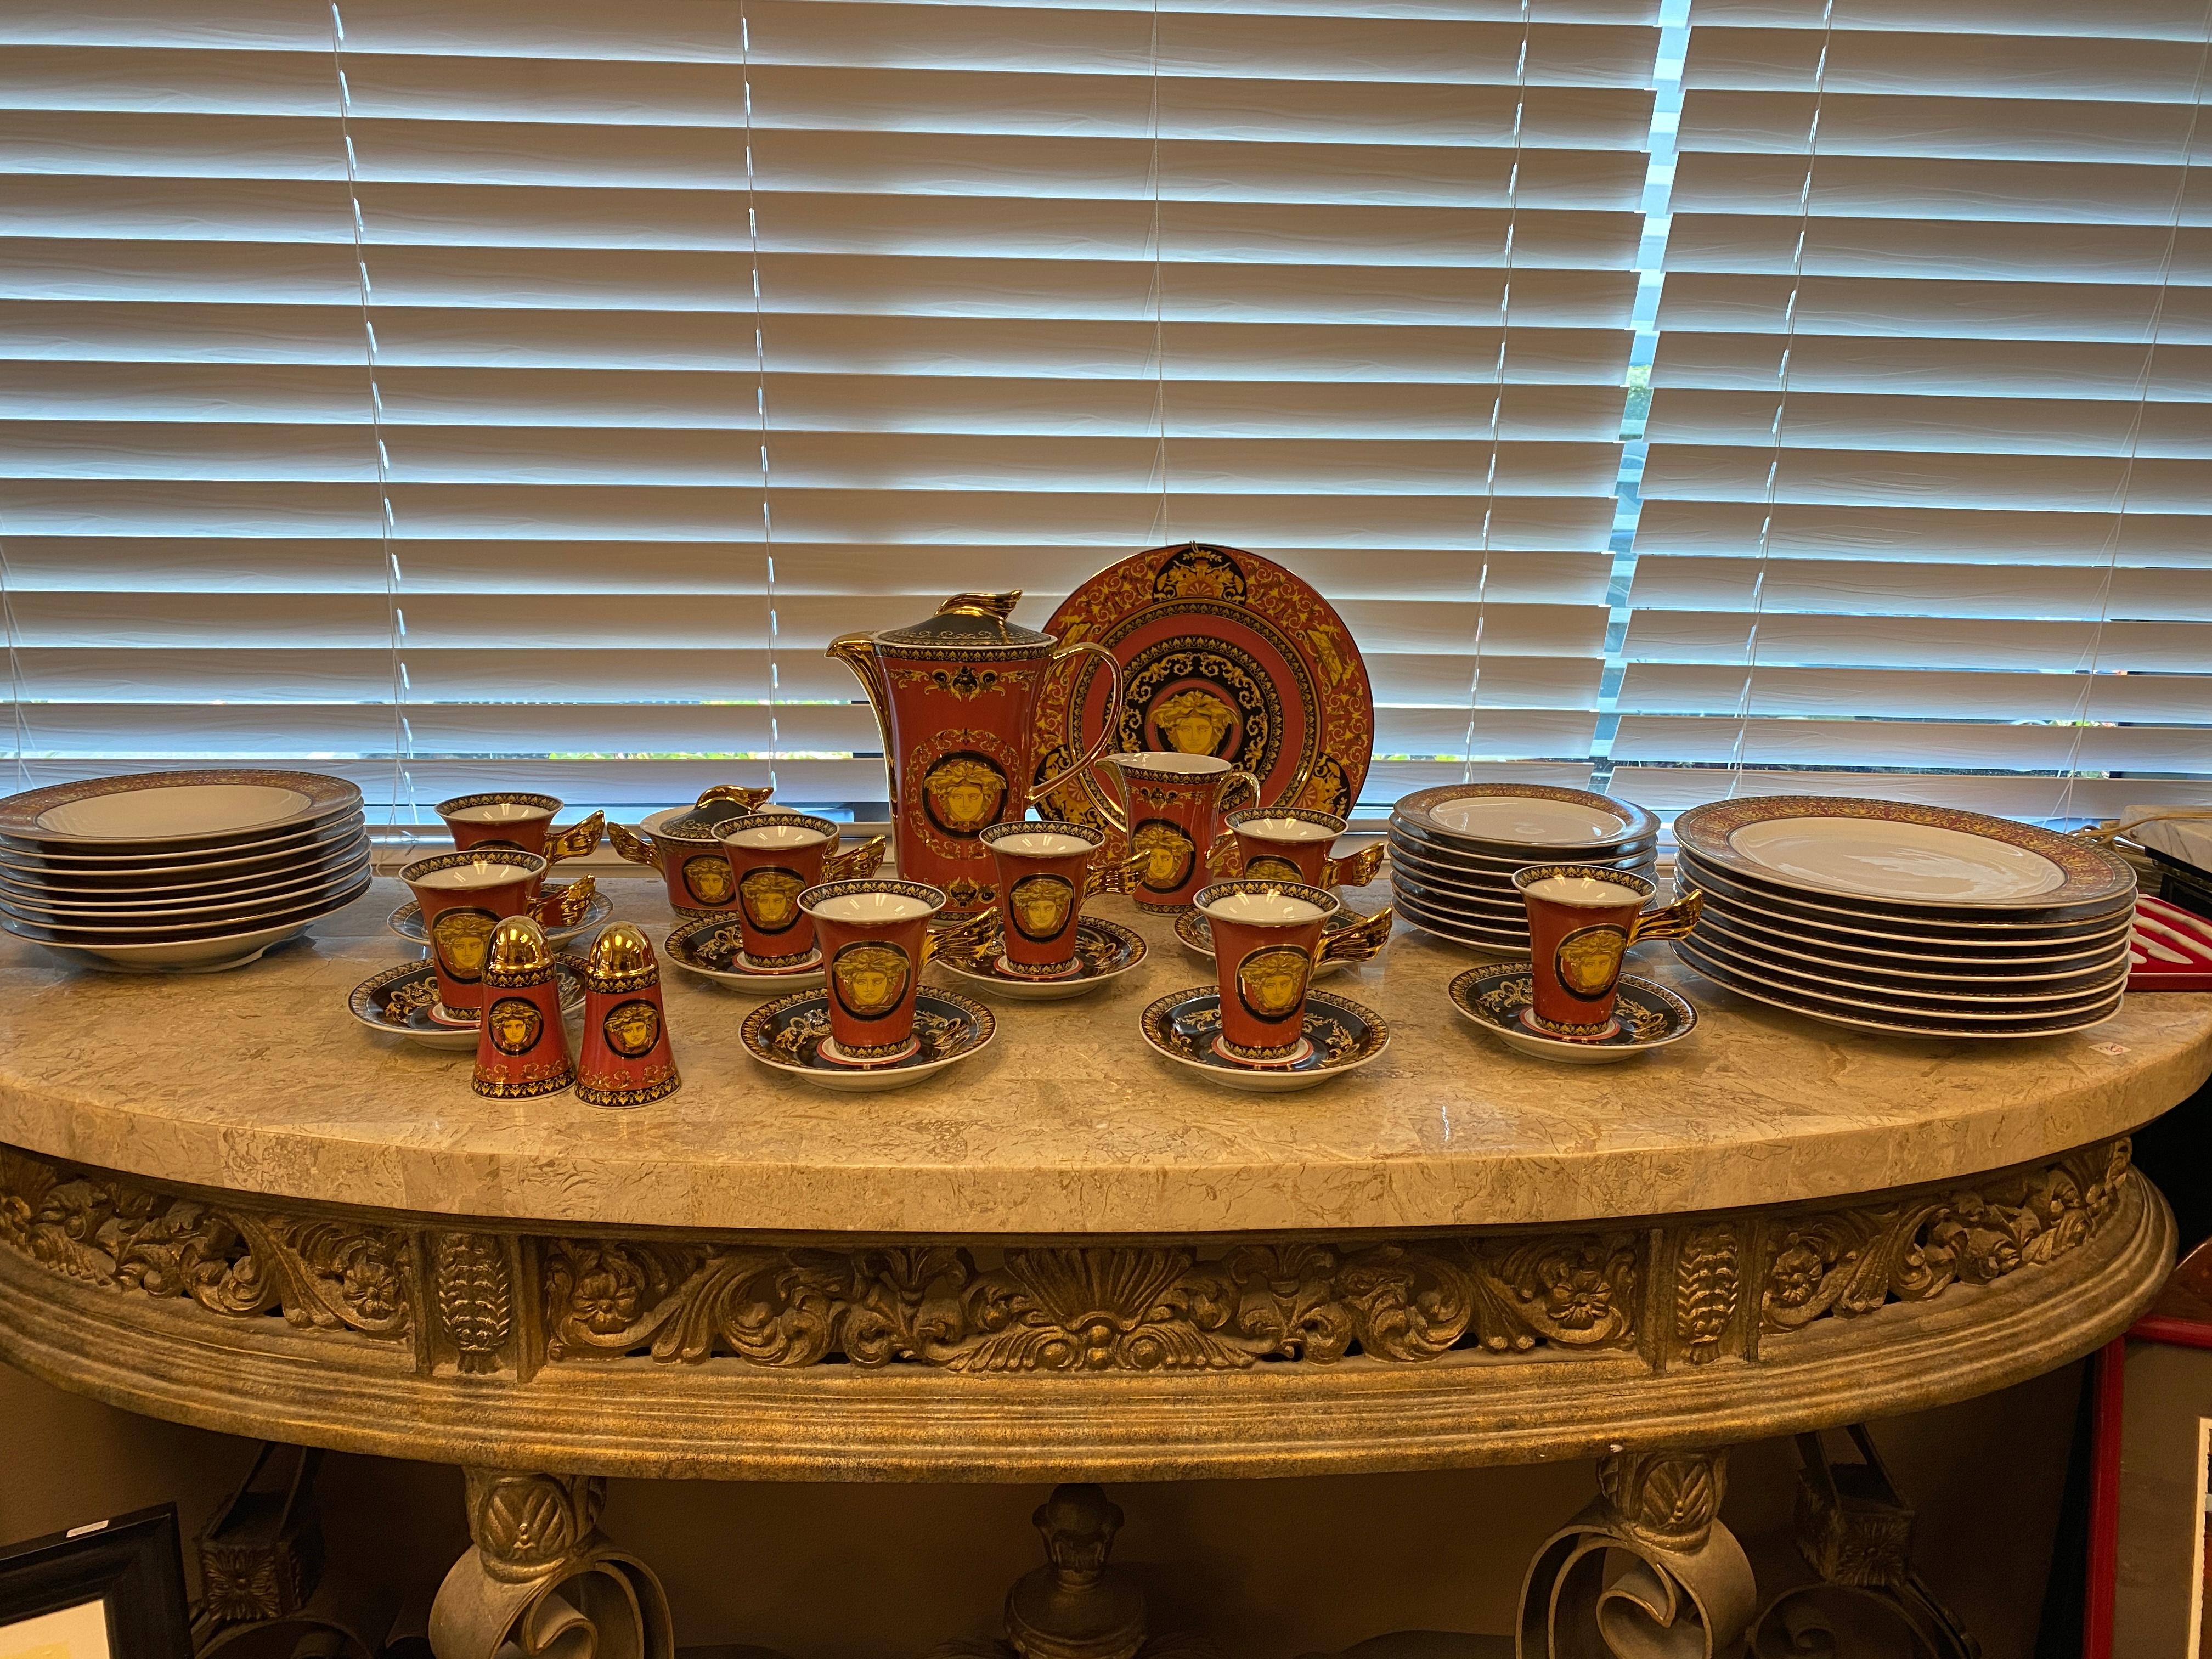 Rosenthal Metts Versace Red Dinnerware Set of 44 pieces 
8 cups with 8 saucers
1 Medusa Red Service Plate
8 Soup Plates/Bowls
8 Dinner Plates
8 Desert Plates
2 Salt/Papper 
1 Coffee Pot
1 Bowl for Sugar
1 Creamer